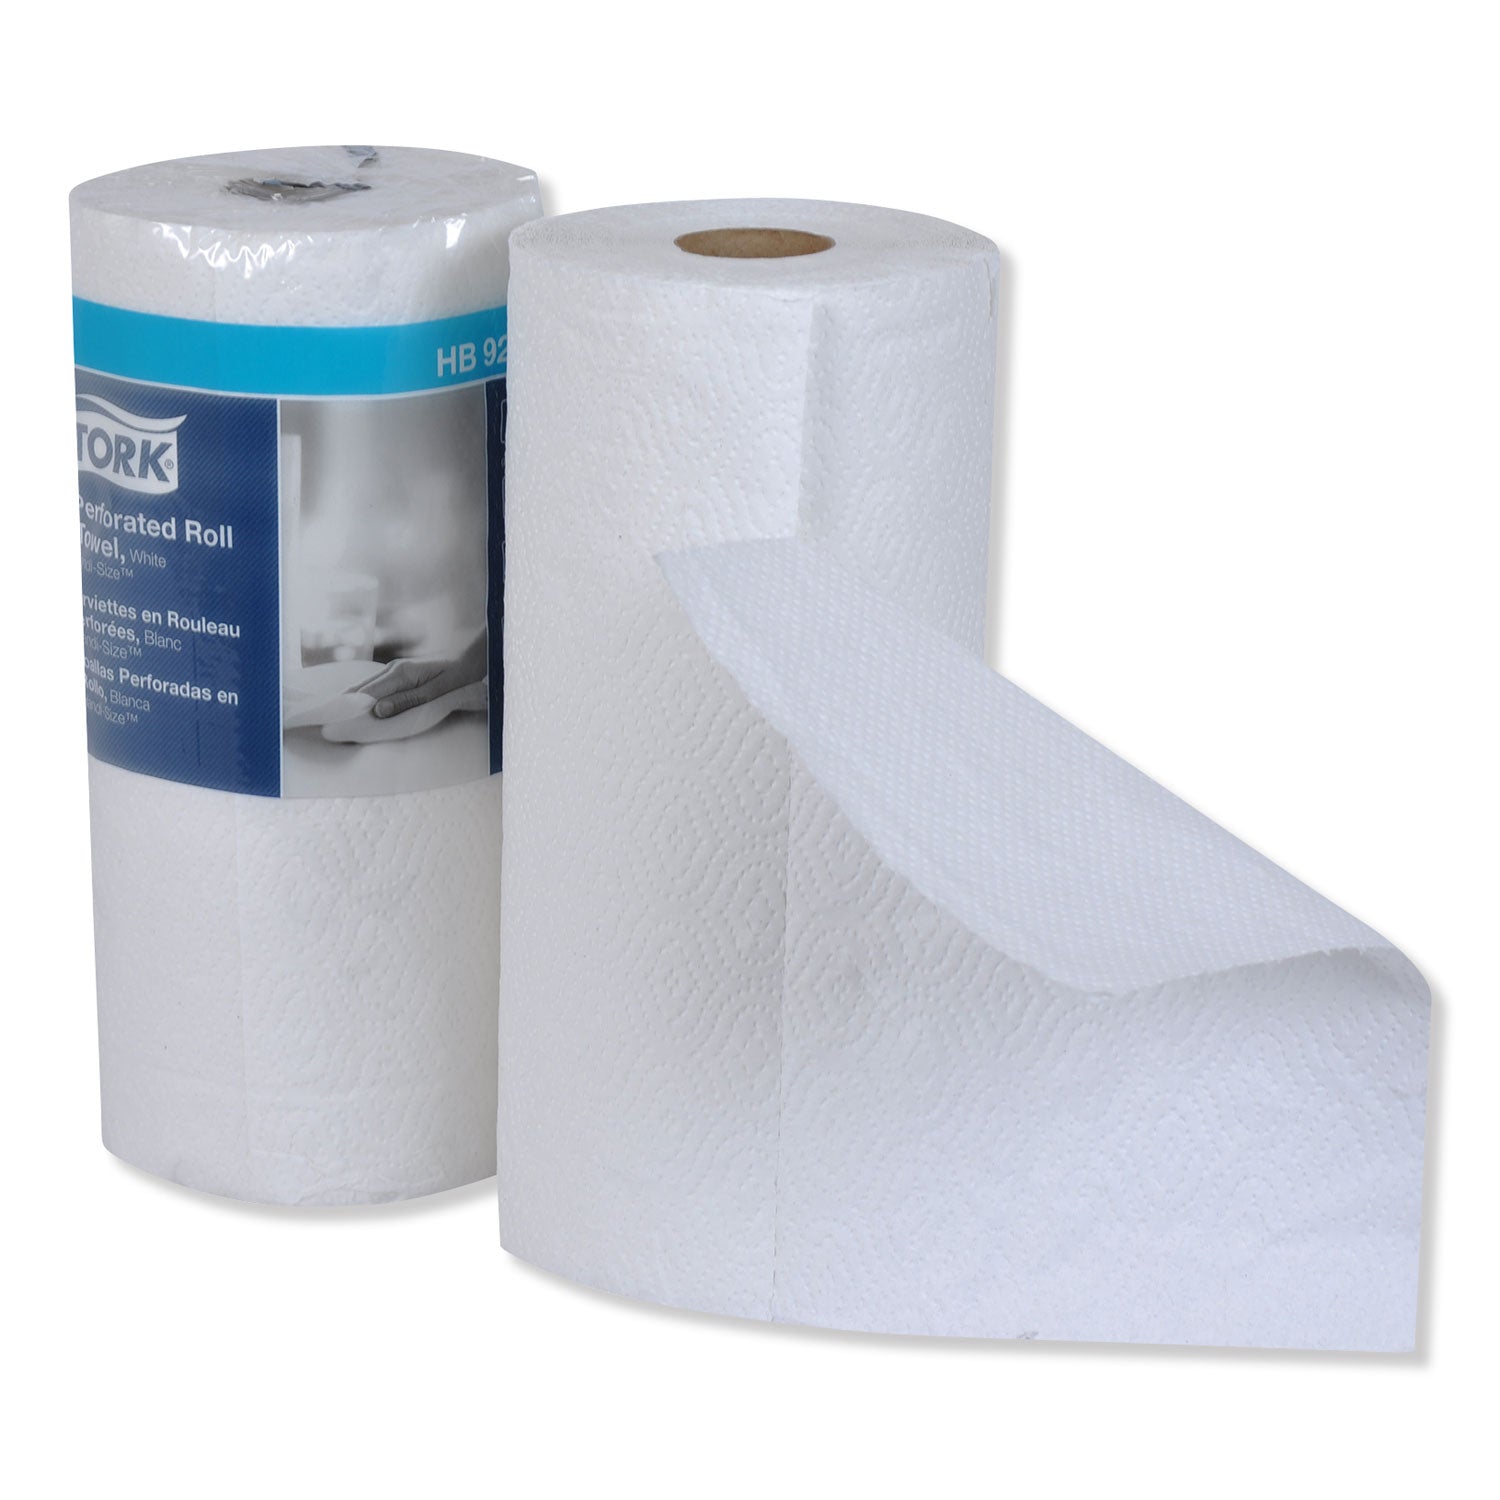 handi-size-perforated-kitchen-roll-towel-2-ply-11-x-675-white-120-roll-30-carton_trkhb9201 - 5